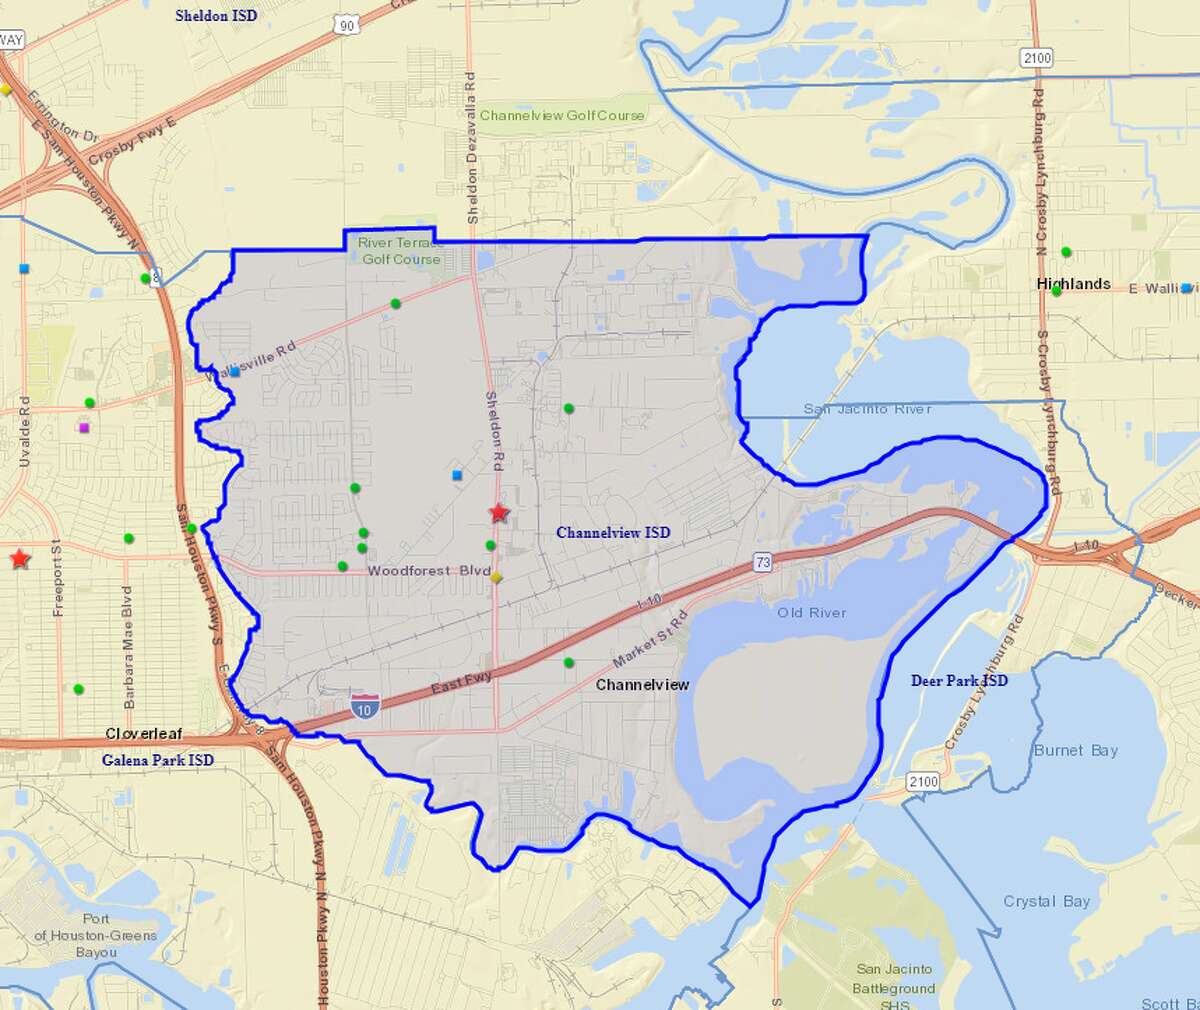 The Harris County School Districts With The Highest Vaccine Exemption Rates